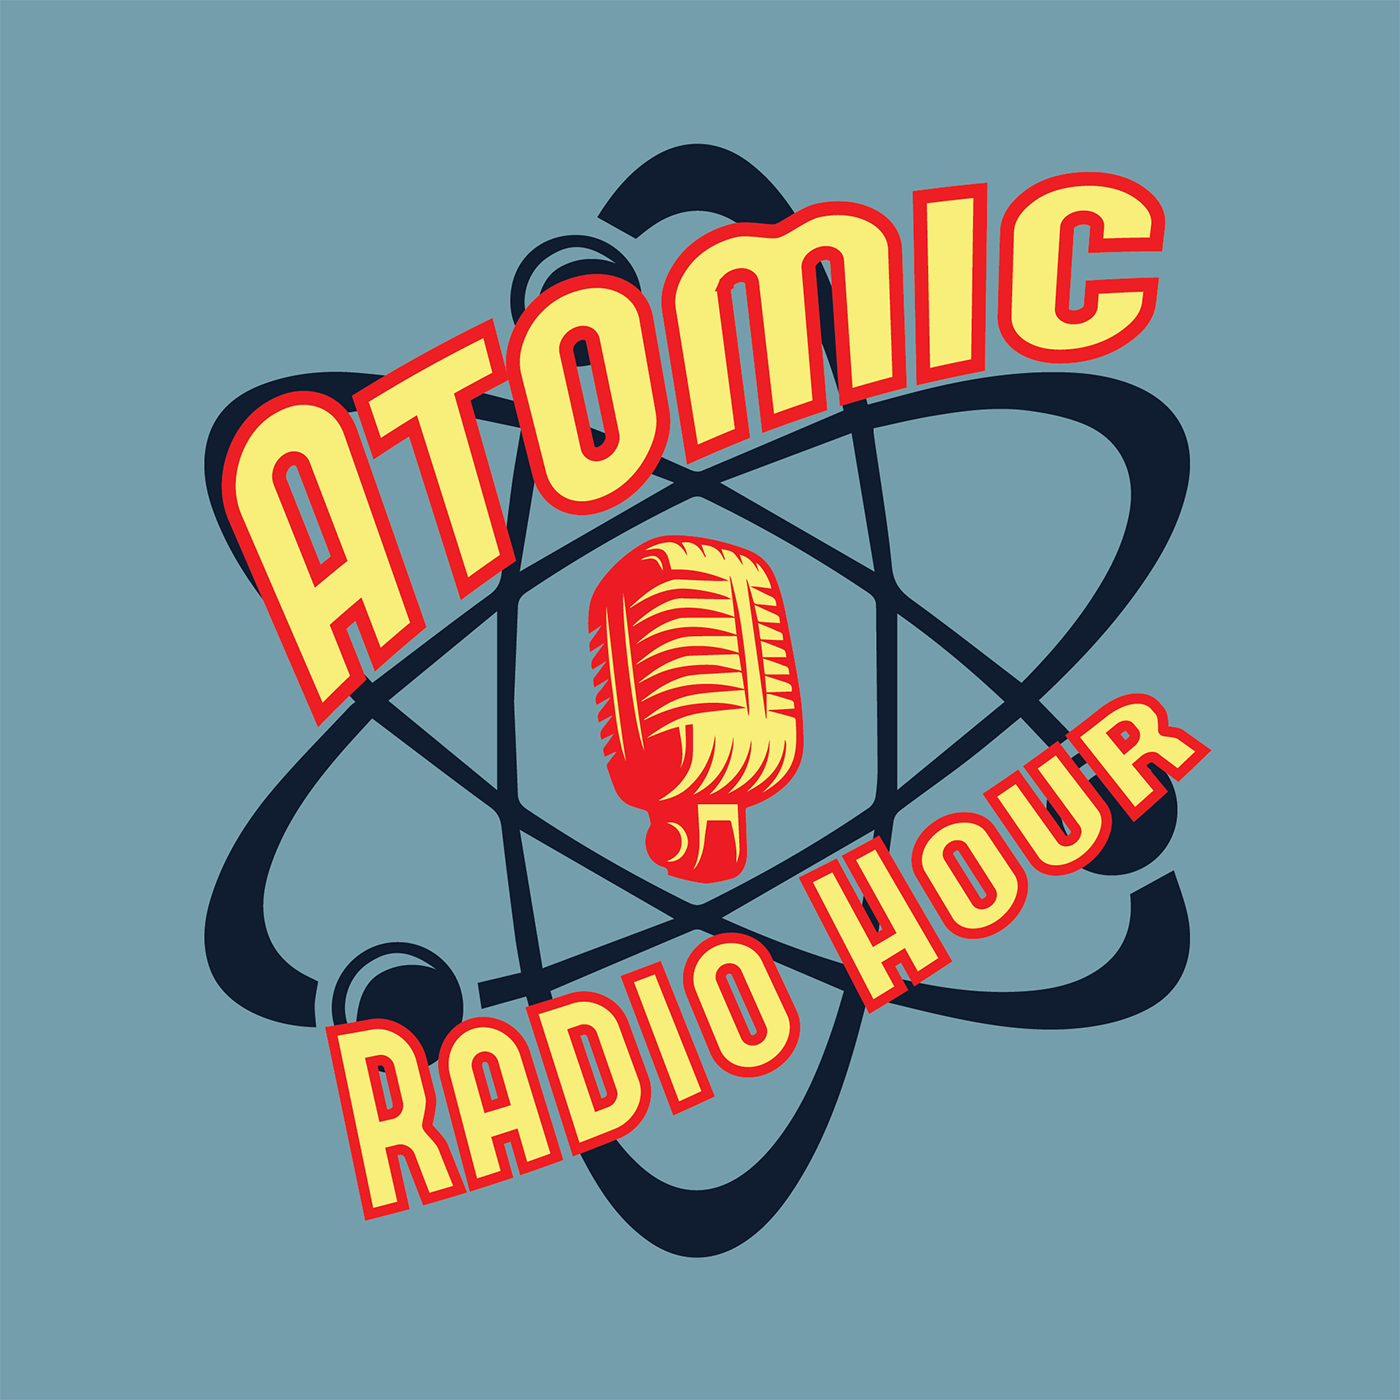 Hypothetical Jackie Chan Part 4 - Episode 157 - Atomic Radio Hour